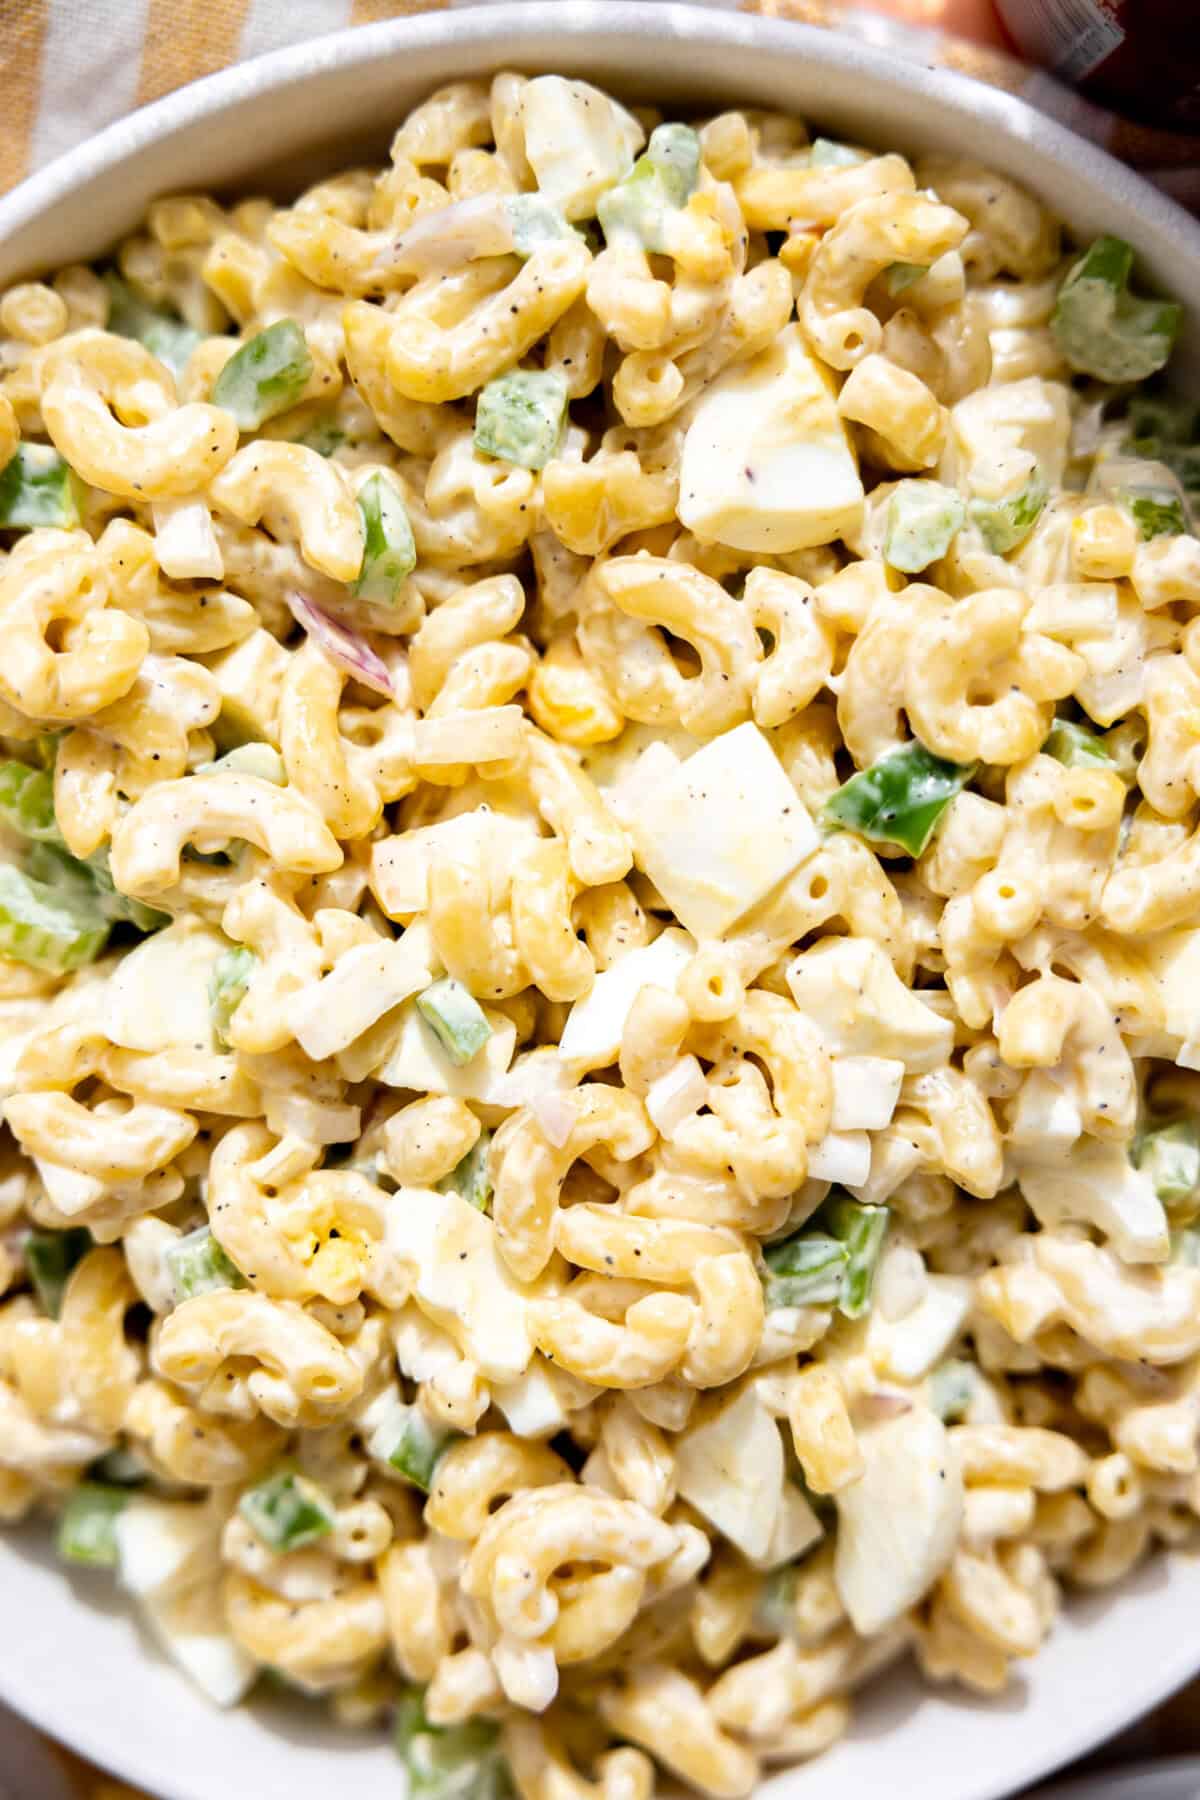 Up close of macaroni salad with creamy dressing, bits of celery, and hard boiled egg.